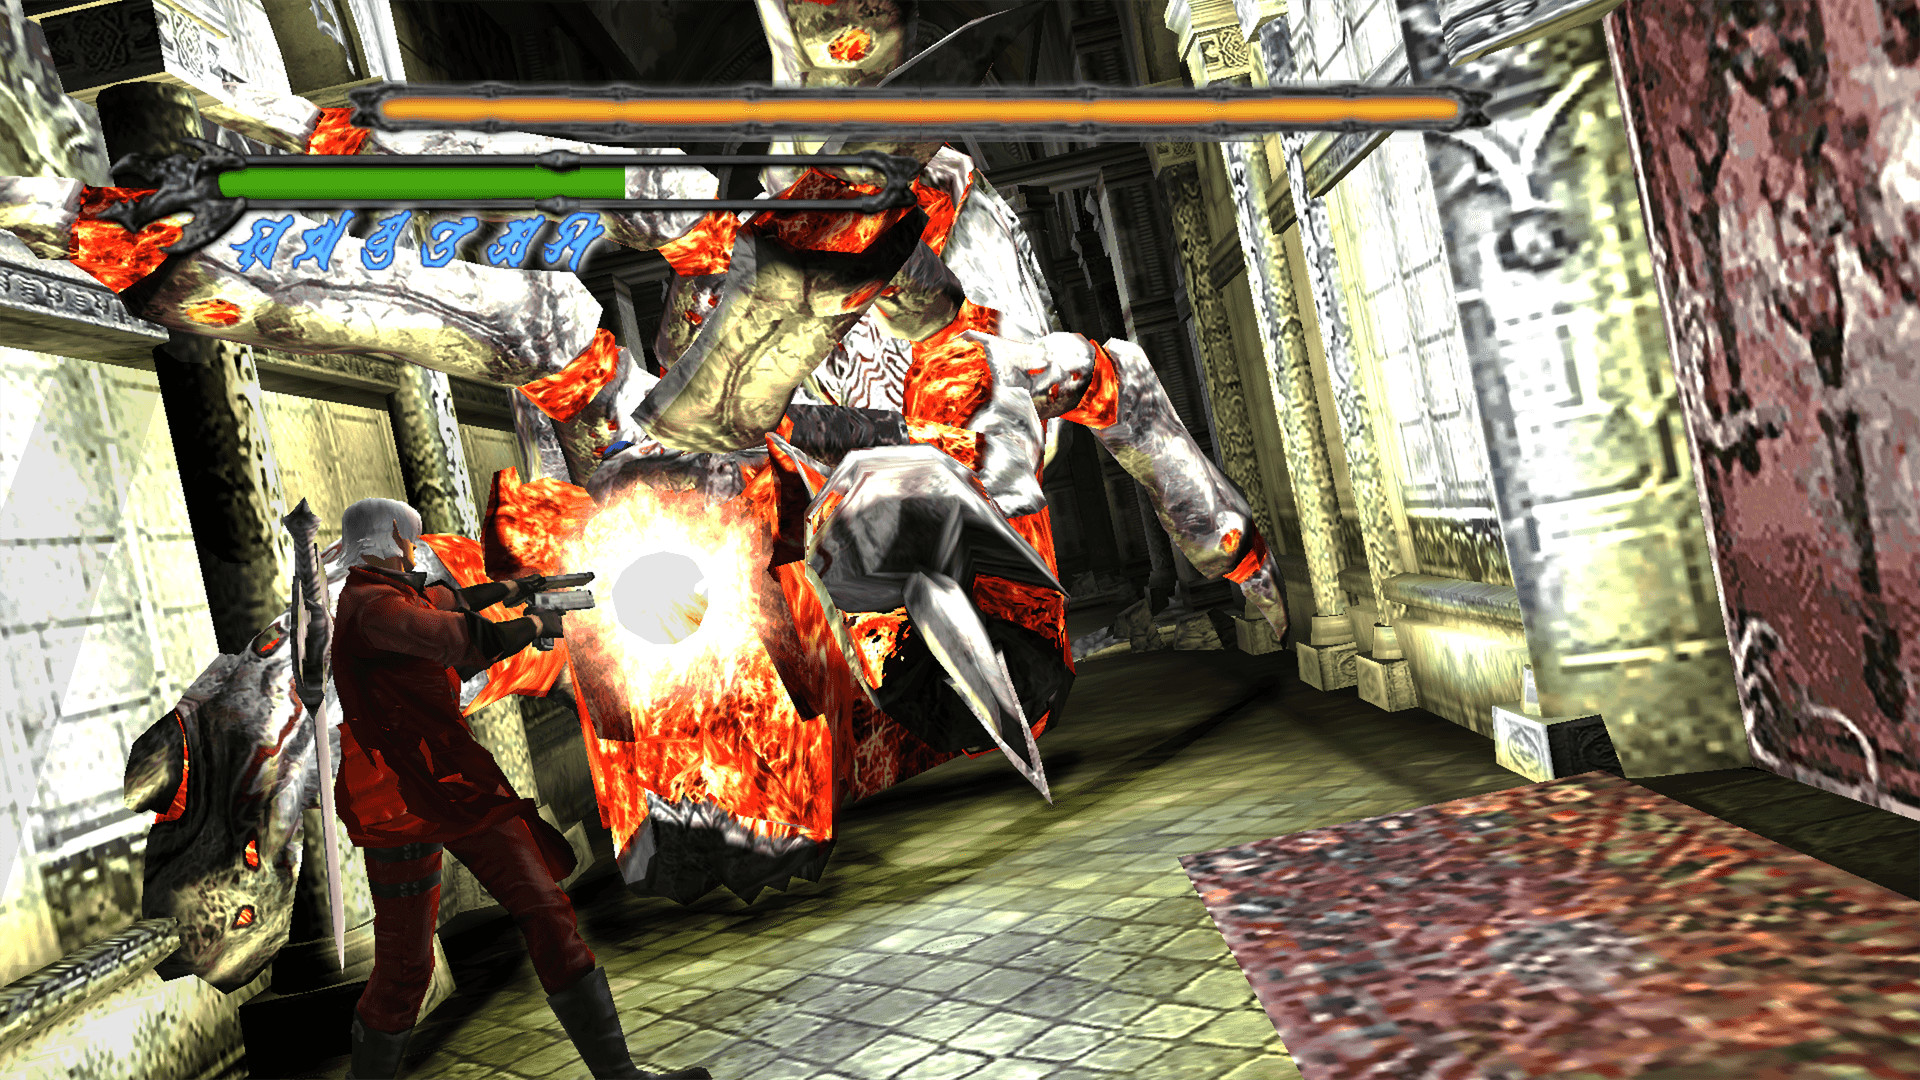 Devil May Cry HD Collection screenshot